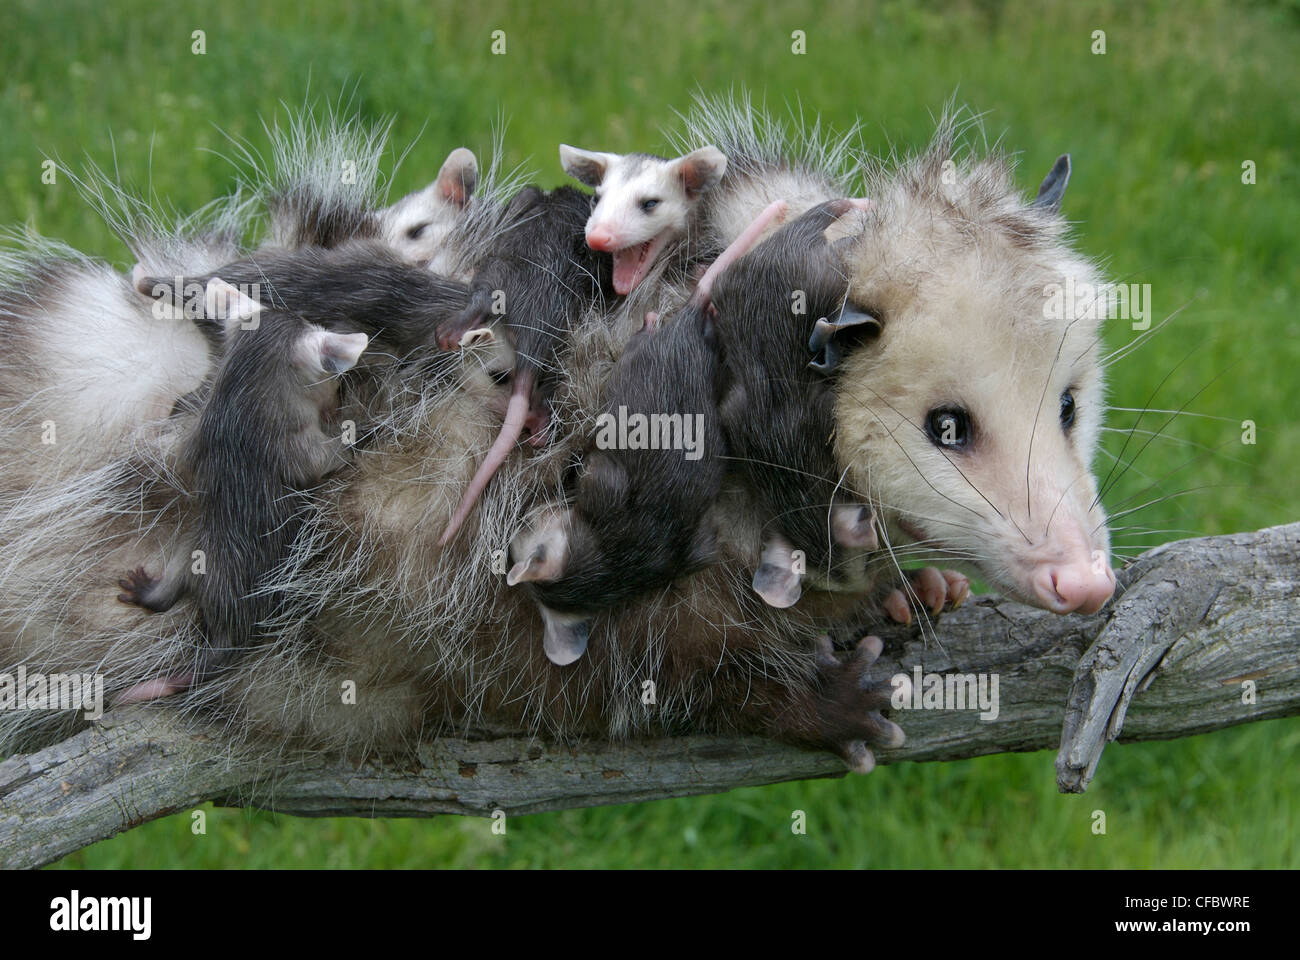 Female opossum (didelphis virginiana) with babies clinging to her, Minnesota, USA Stock Photo